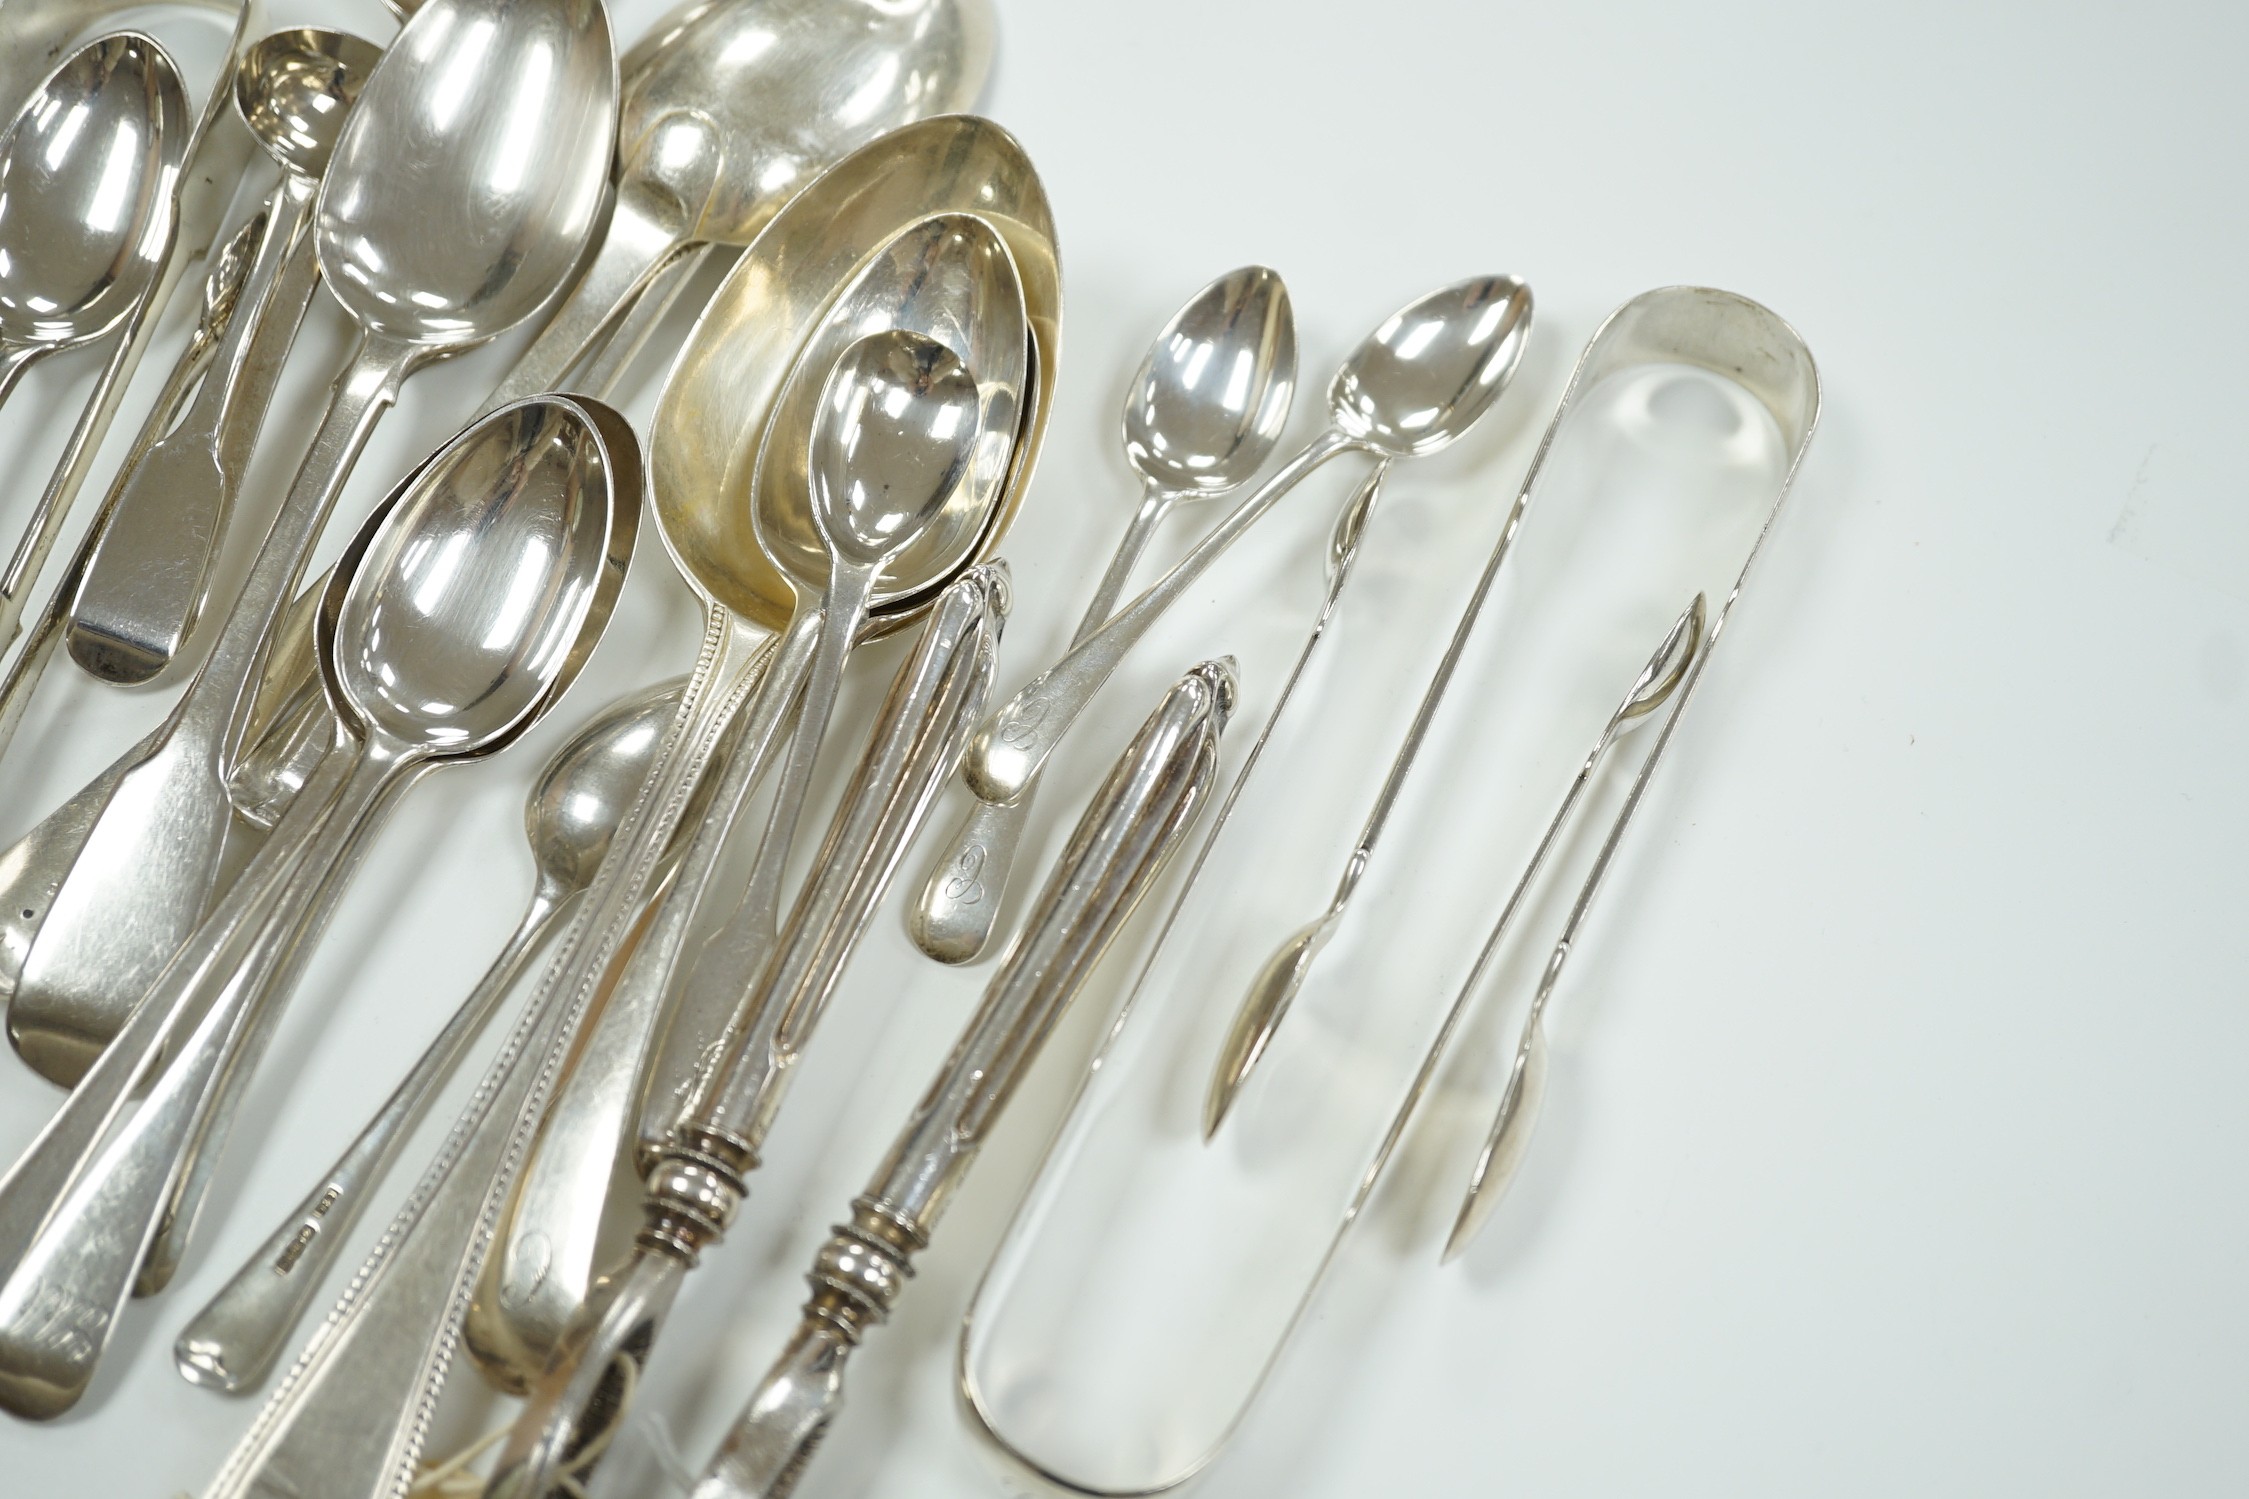 A quantity of assorted mainly 19th century silver flatware, various patterns, dates and makers, including a cased set of six 1937 Coronation silver teaspoons, four pairs of Georgian sugar tongs and a pair of Edwardian si